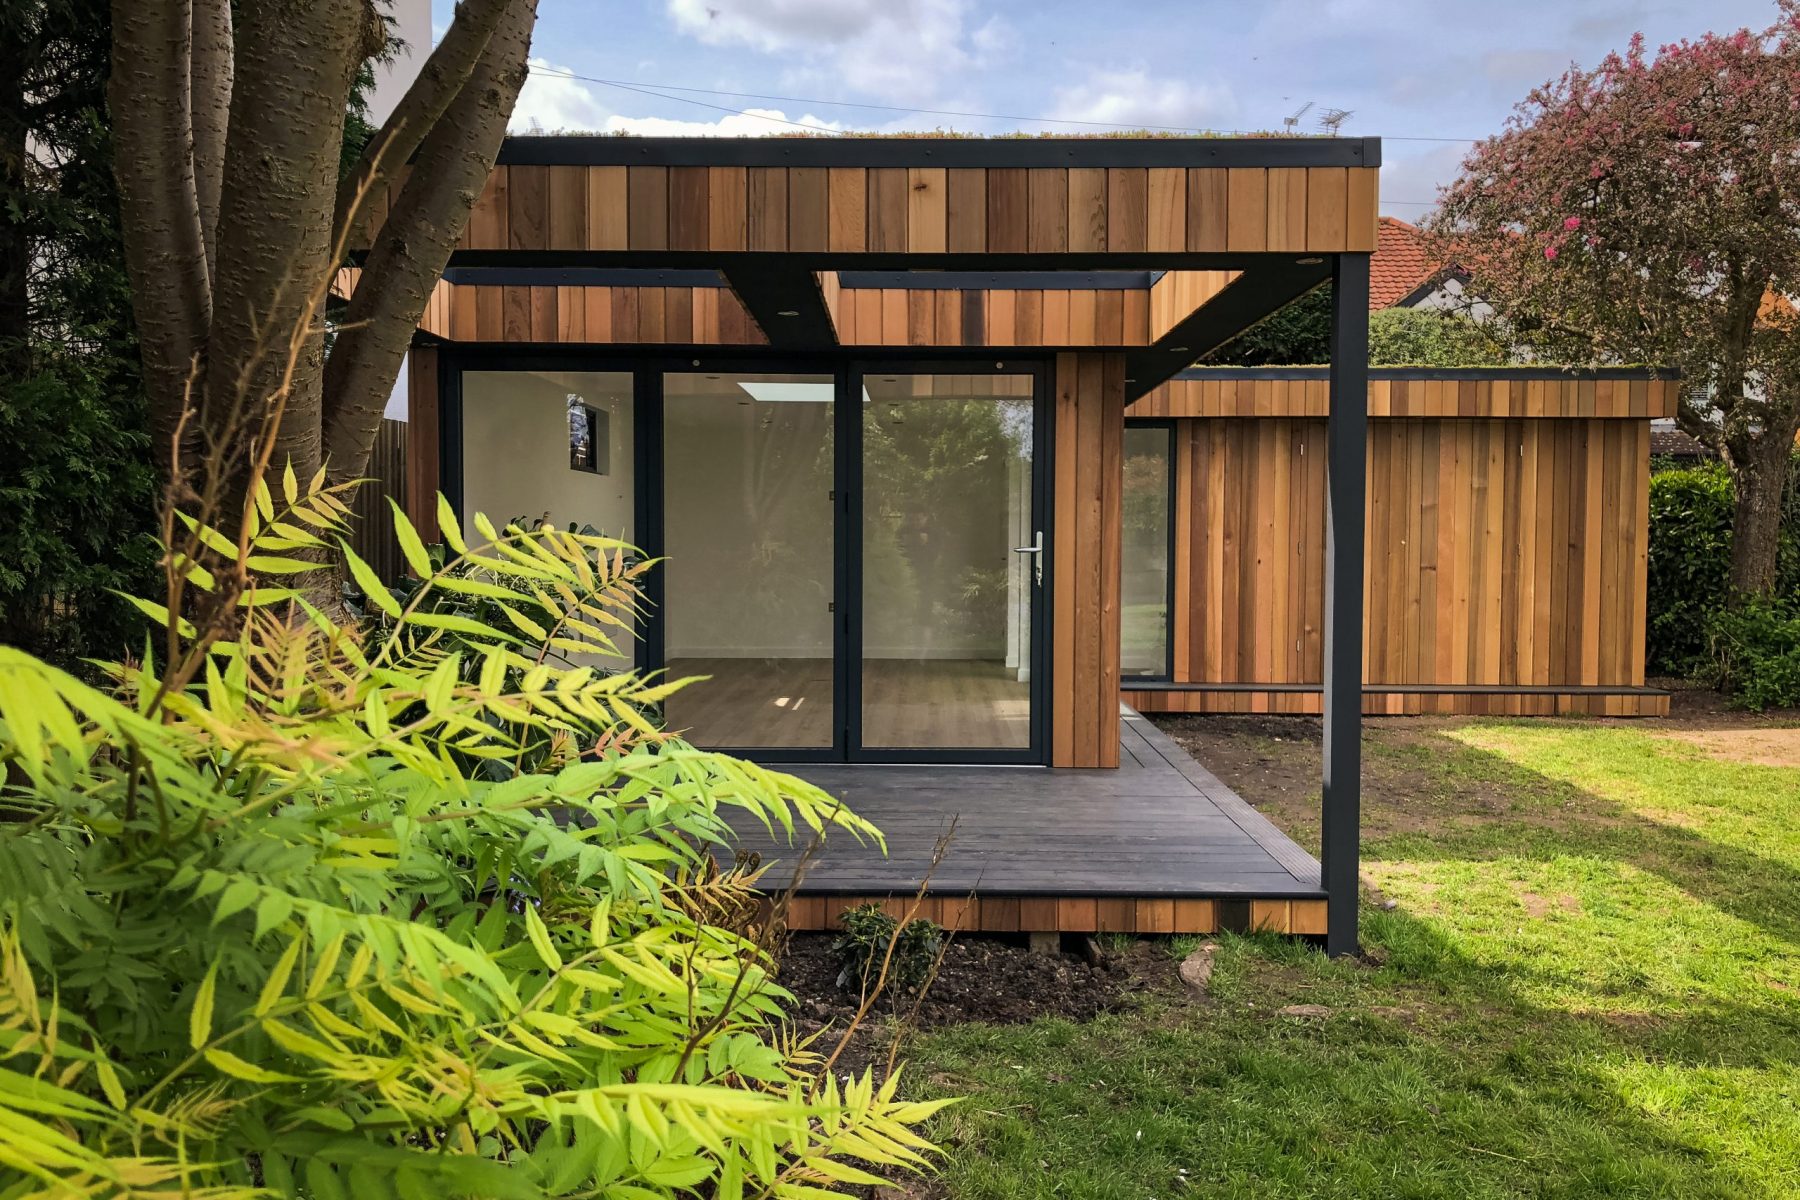 Vivid Green L-shaped garden room with western red cedar cladding, grey composite decking and anthracite grey bi-fold doors and windows, opening to an elevated patio covered by an open overhang, with foliage in the foreground.